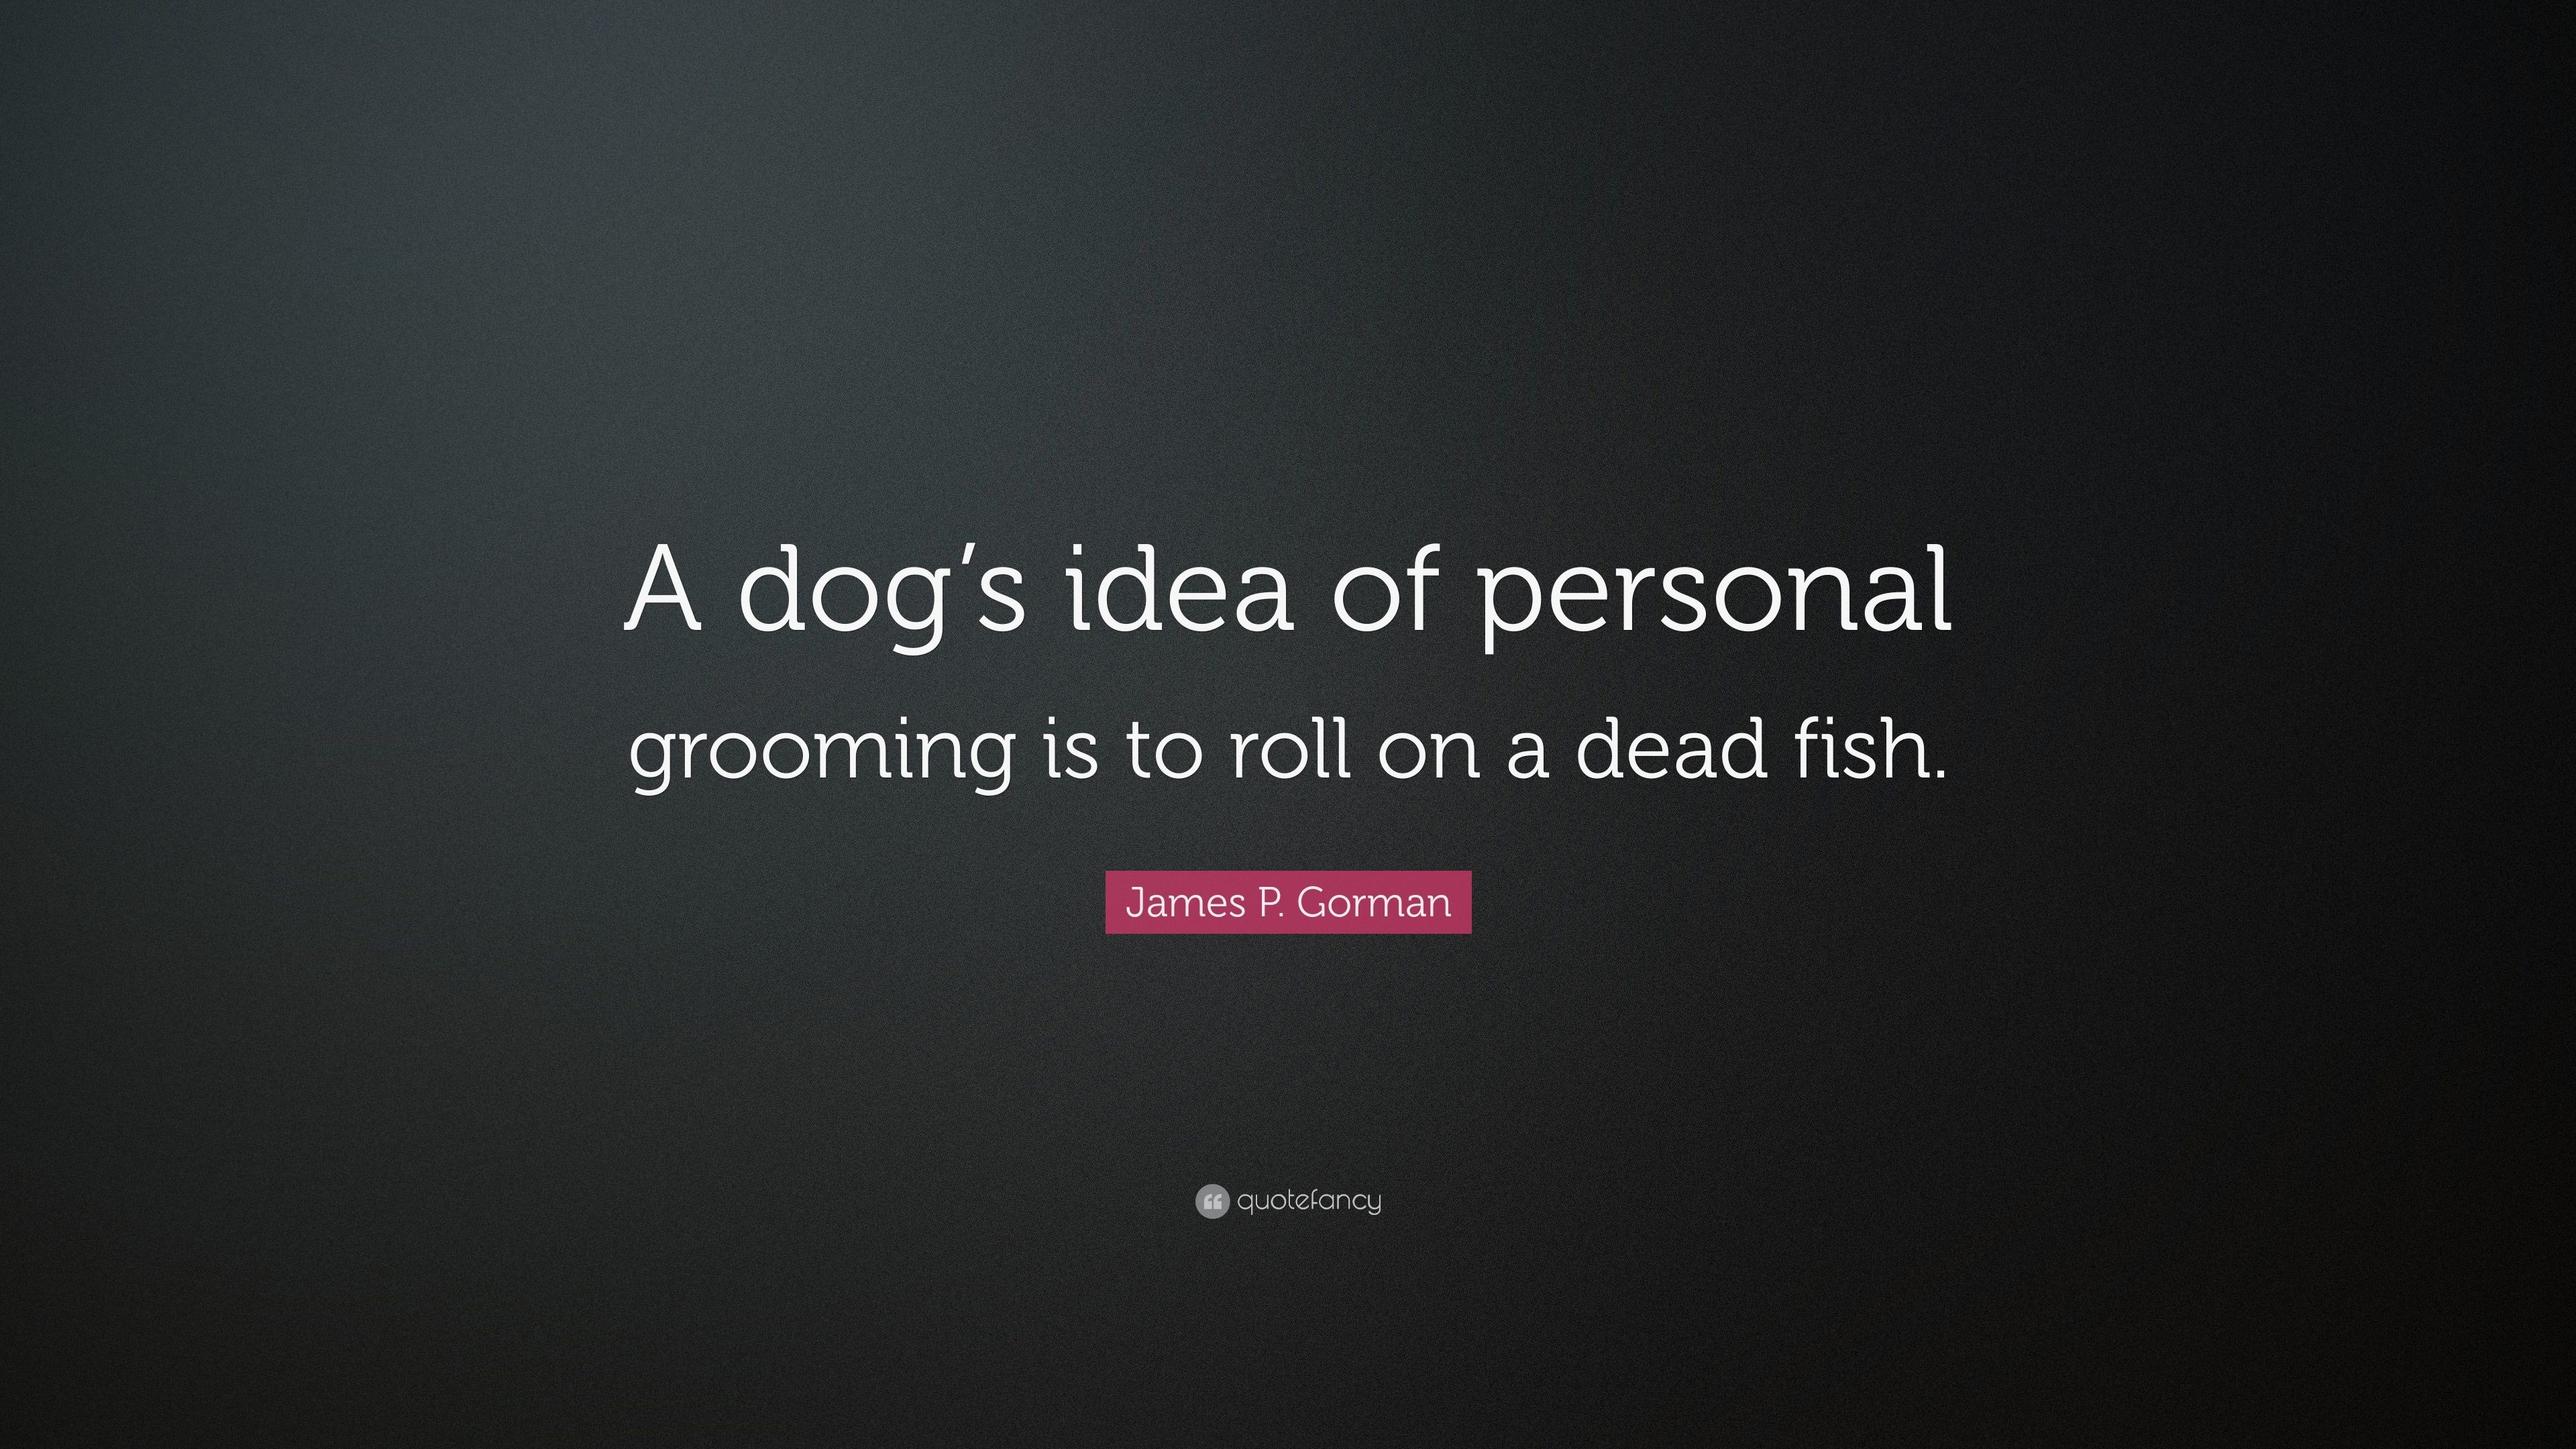 3840x2160 James P. Gorman Quote: “A dog's idea of personal grooming is to roll